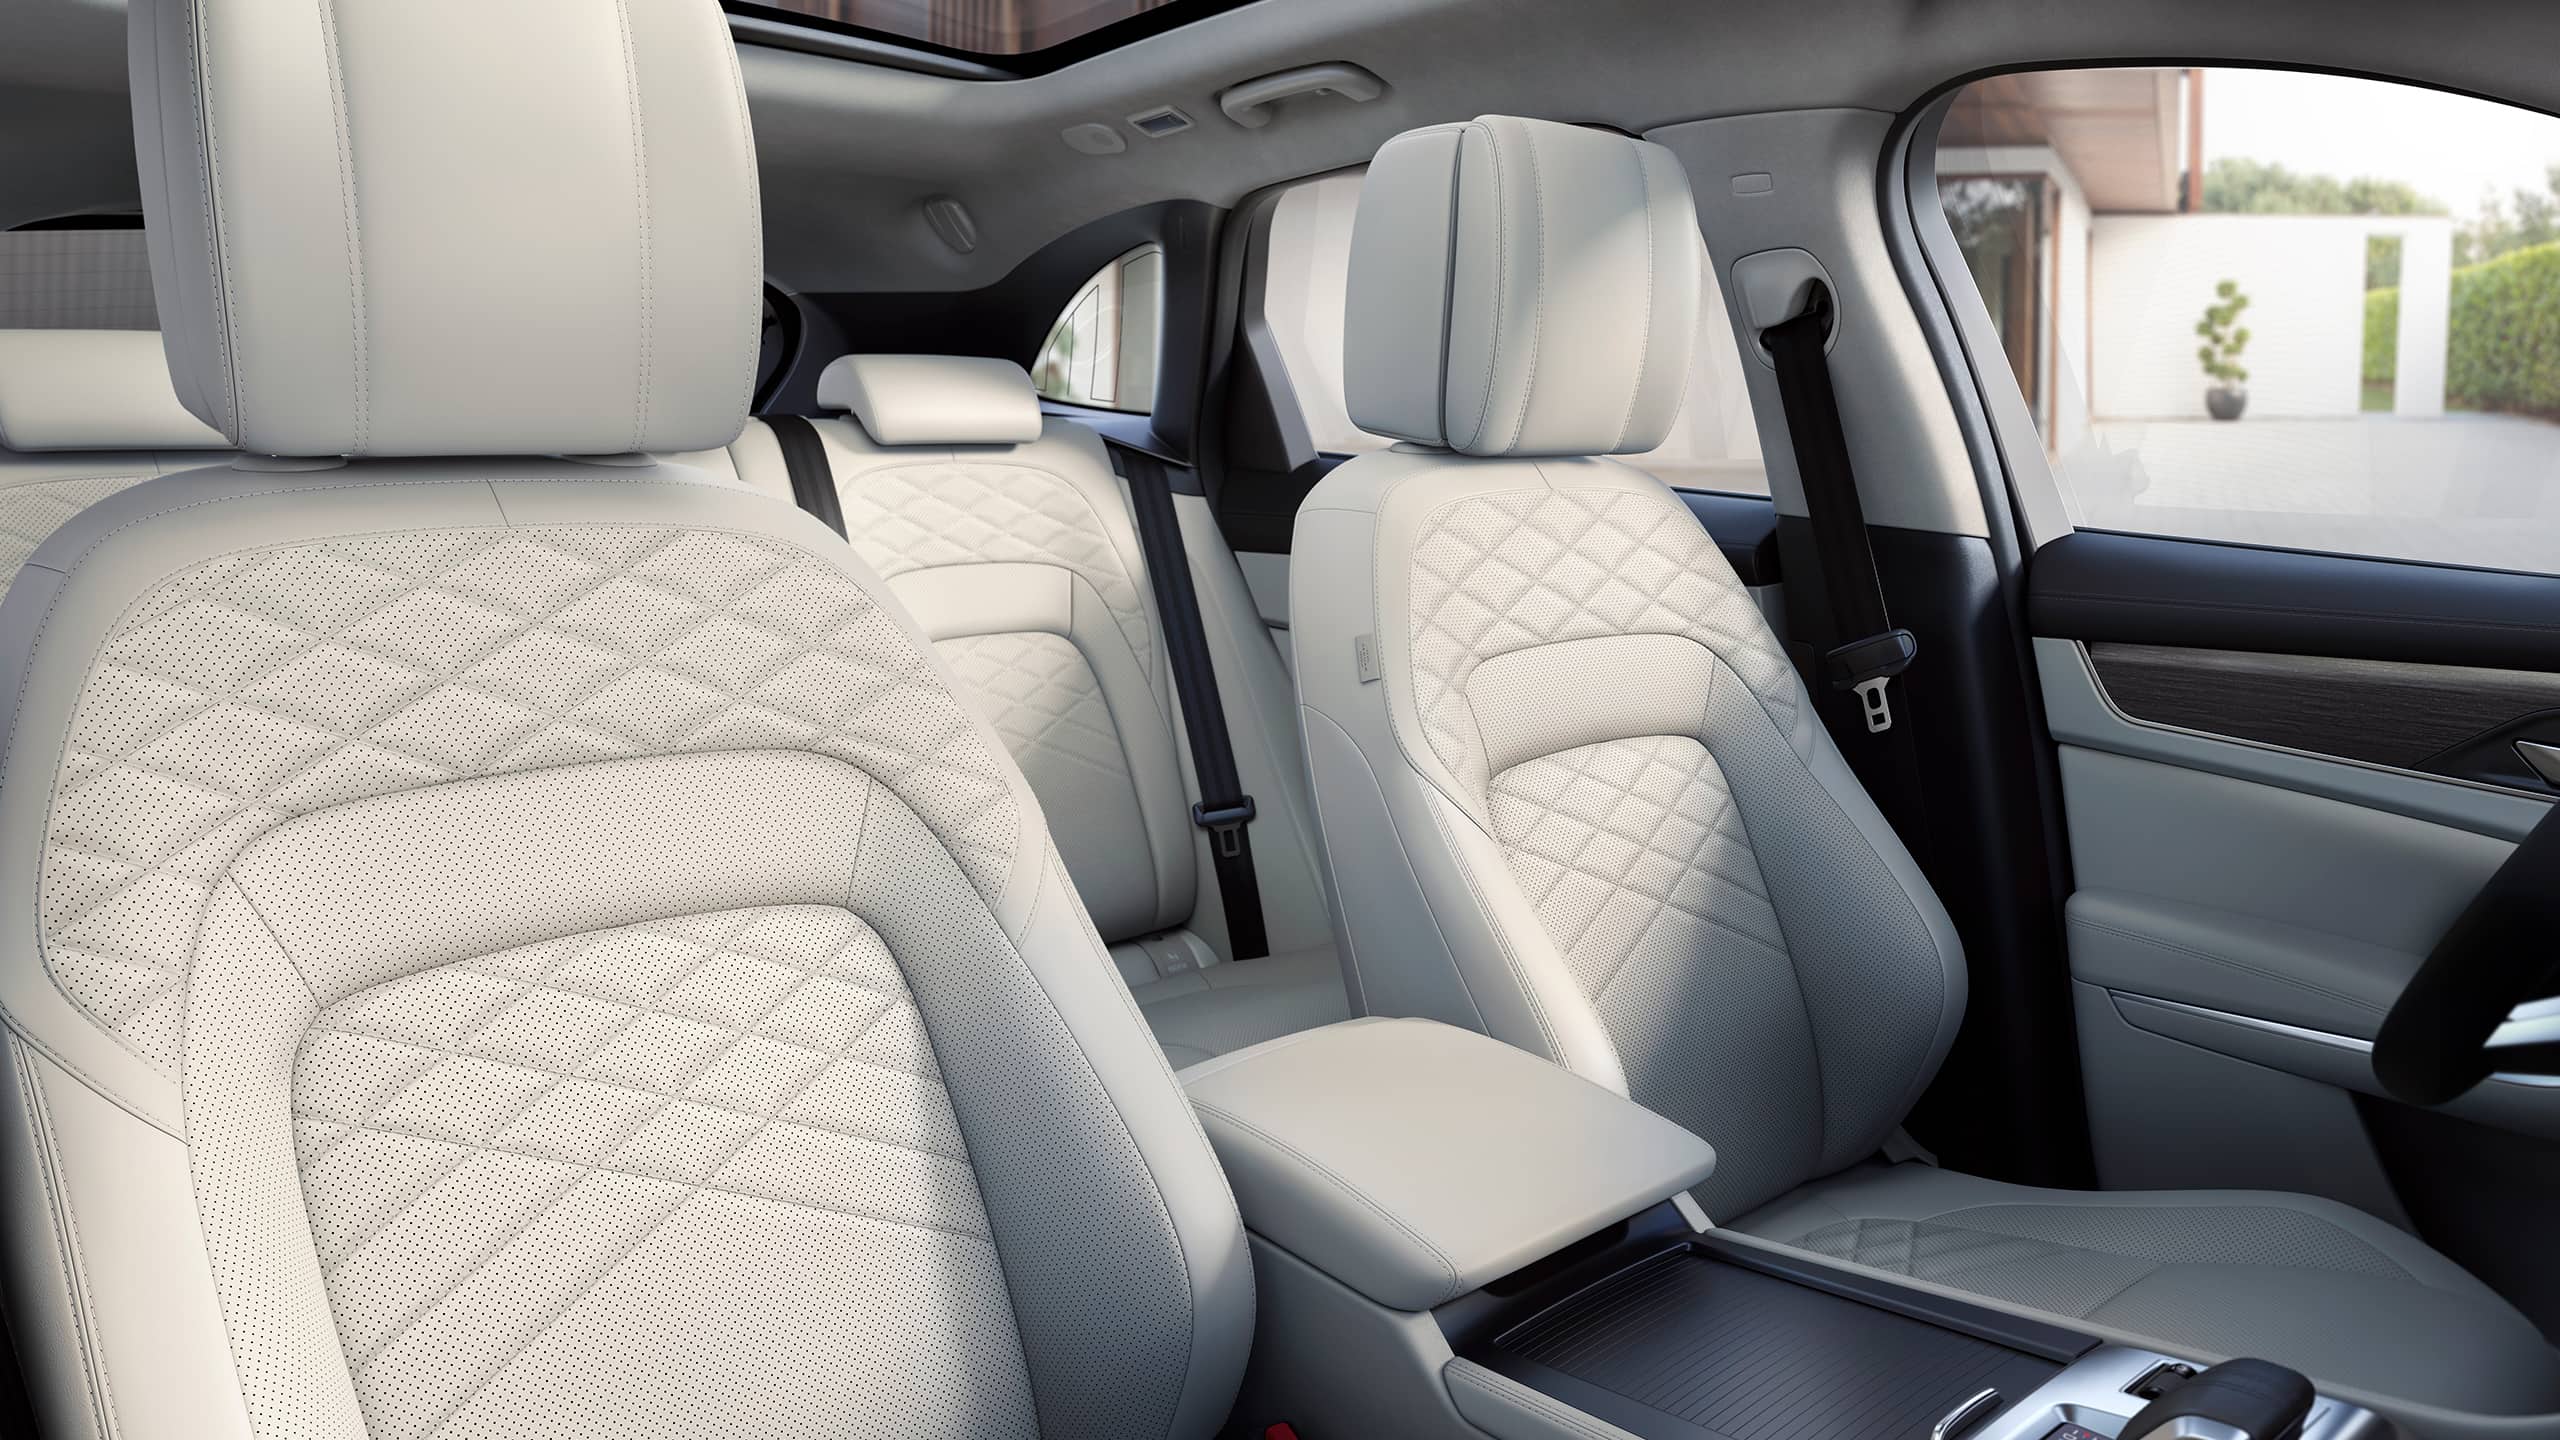 Jaguar F-Pace comfortable and stylish leather seats 